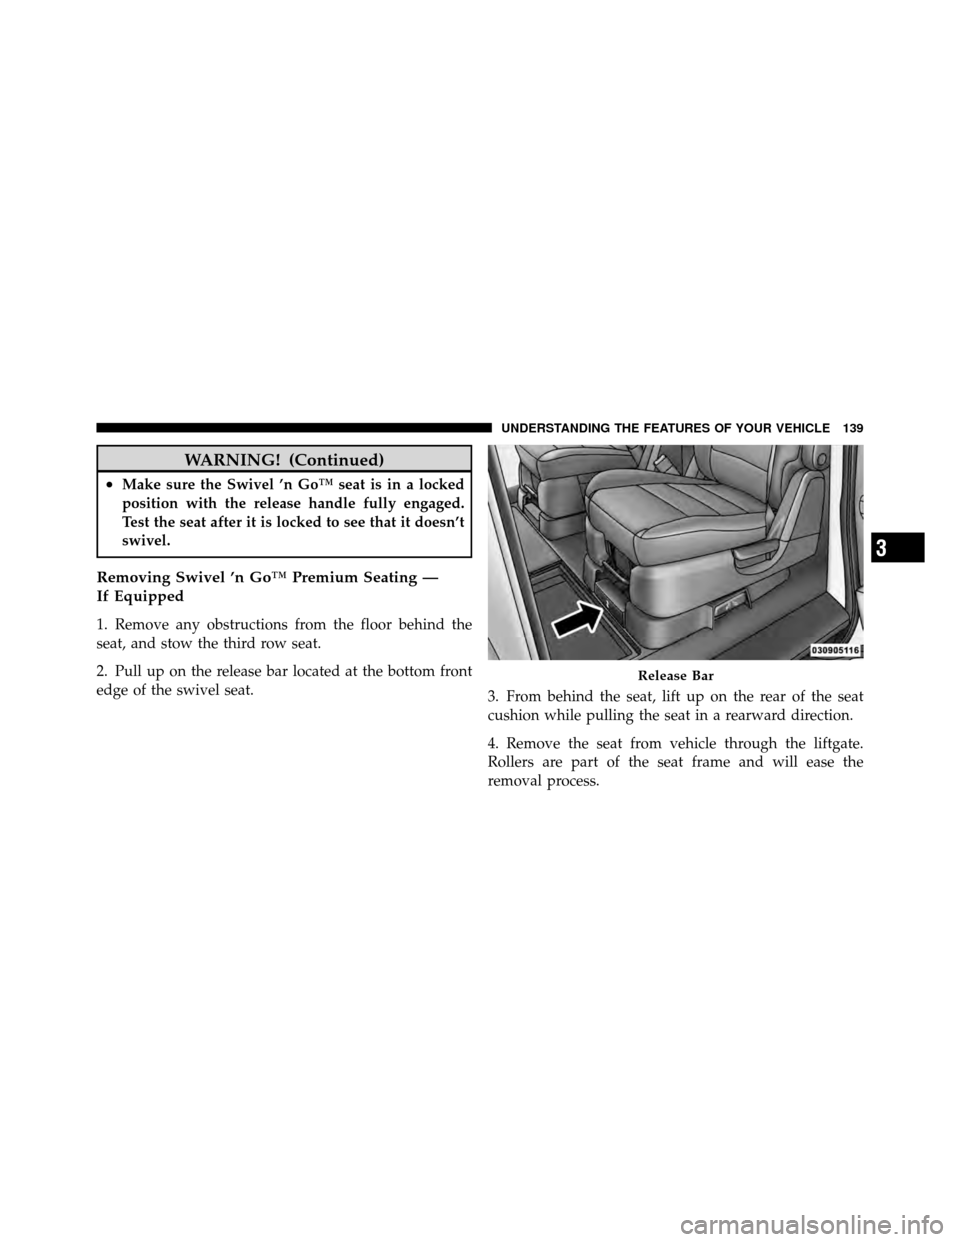 DODGE GRAND CARAVAN 2010 5.G Owners Manual 
WARNING! (Continued)
•Make sure the Swivel ’n Go™ seat is in a locked
position with the release handle fully engaged.
Test the seat after it is locked to see that it doesn’t
swivel.
Removing 